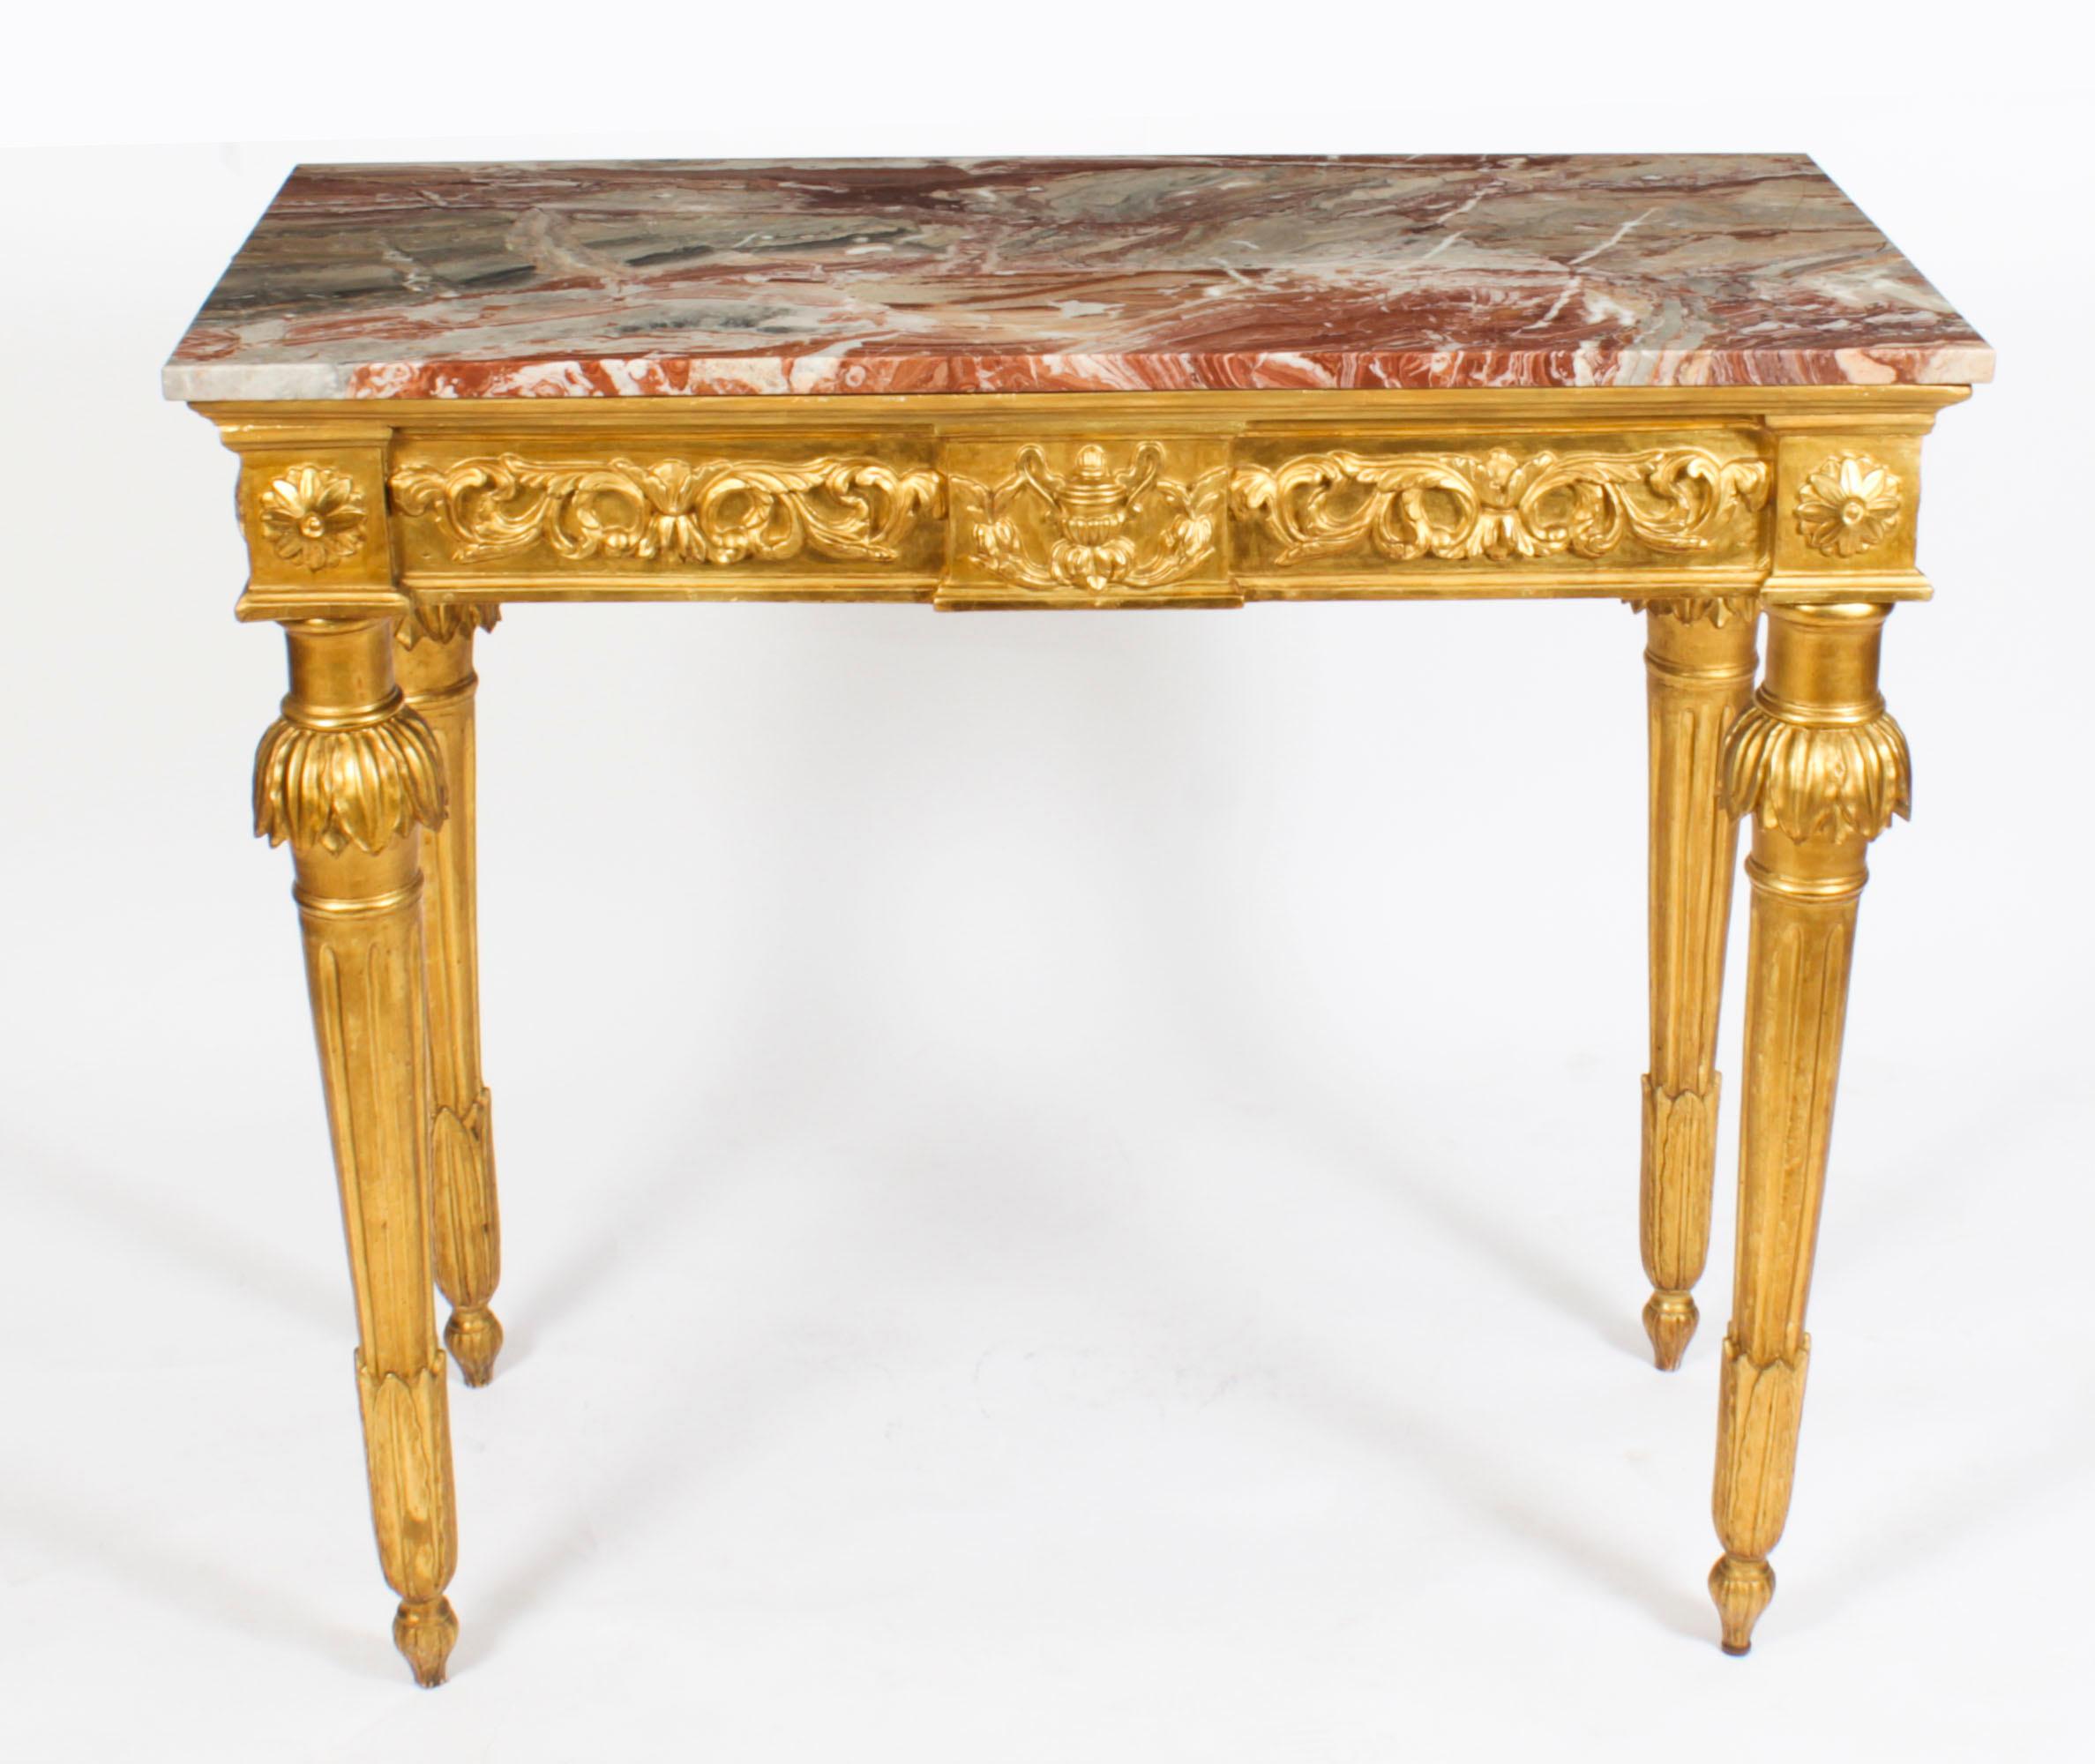 A fine antique Louis XV Revival carved giltwood marble topped console table, circa 1870 in date.
 
This finely carved giltwood console table is surmounted with an exquisite shaped rectangular Italian Breccia marble top above a frieze carved with